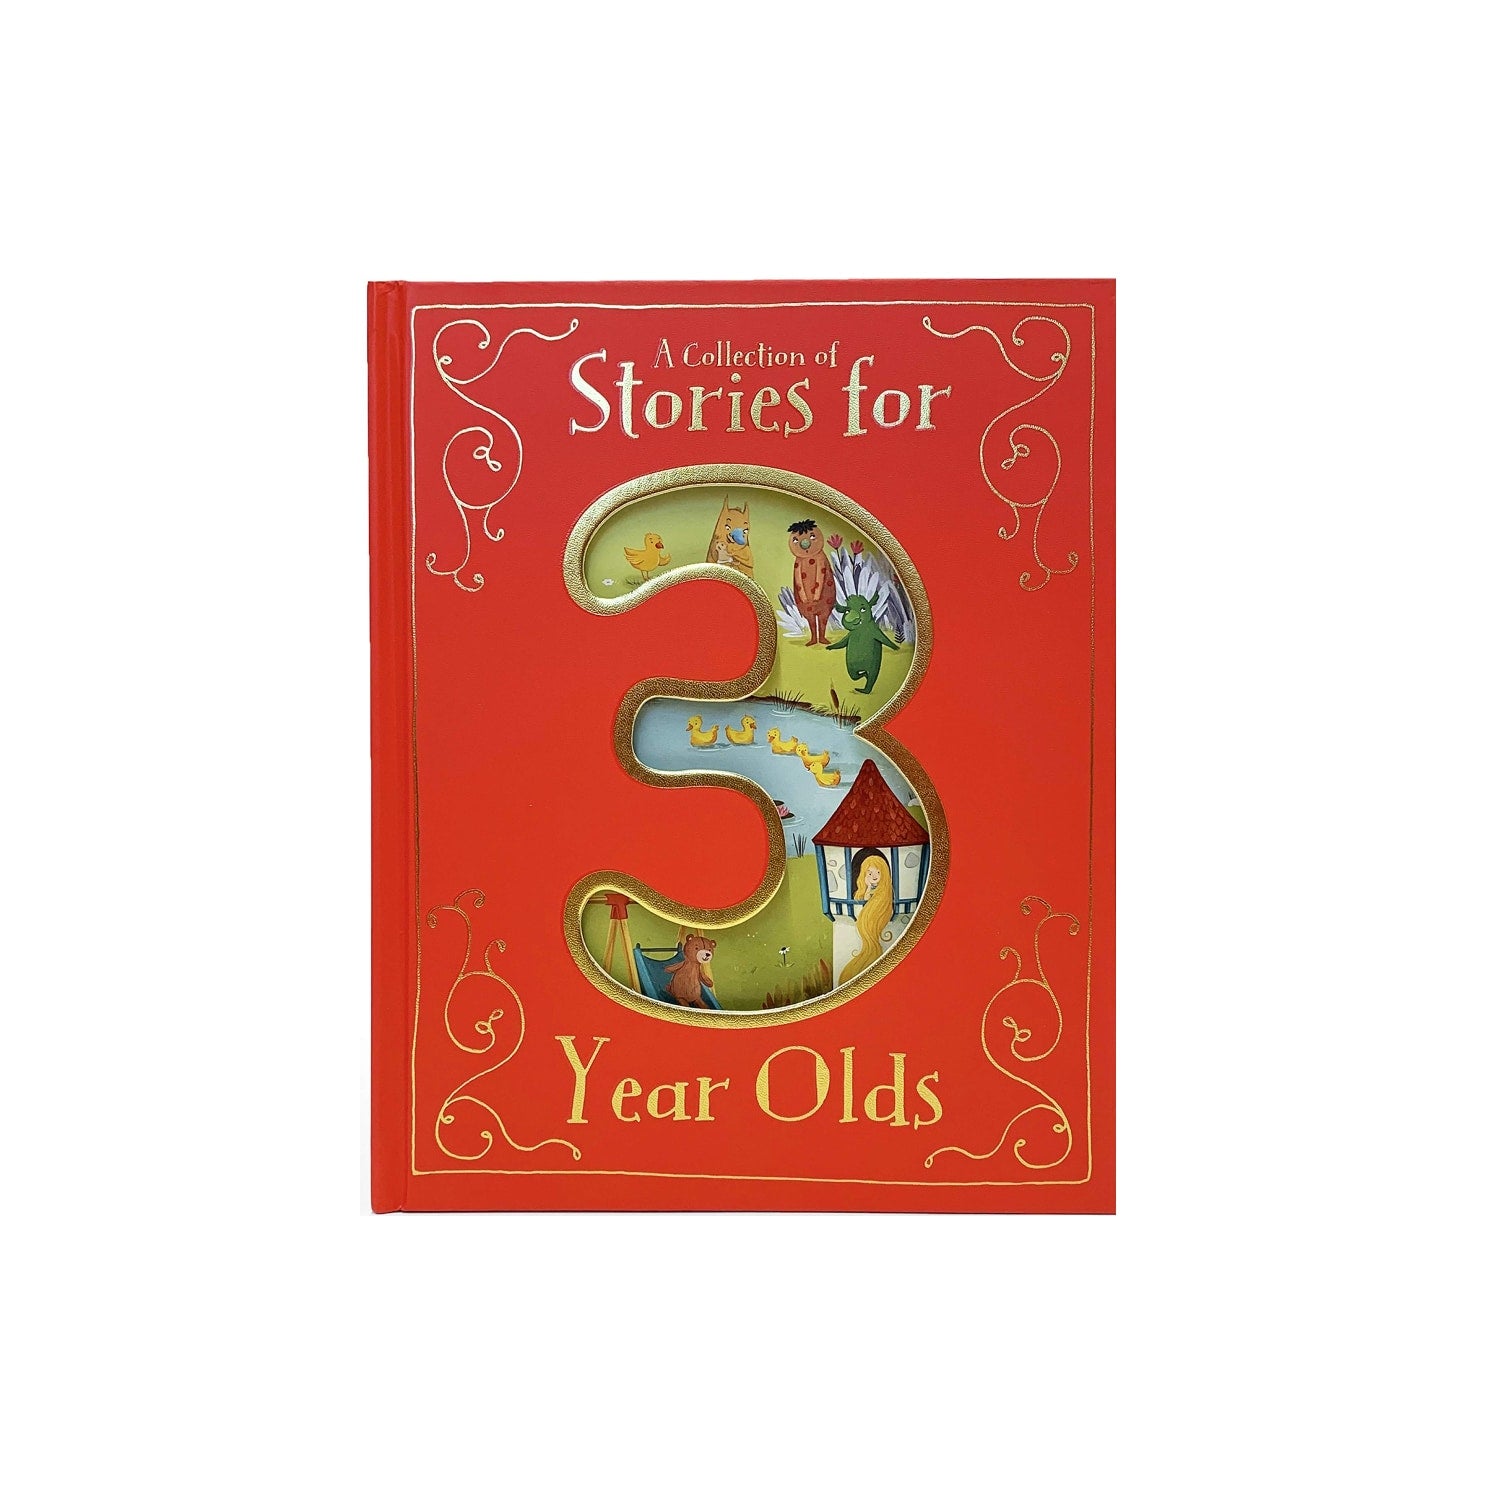 A Collection of Stories for 3-Year Olds